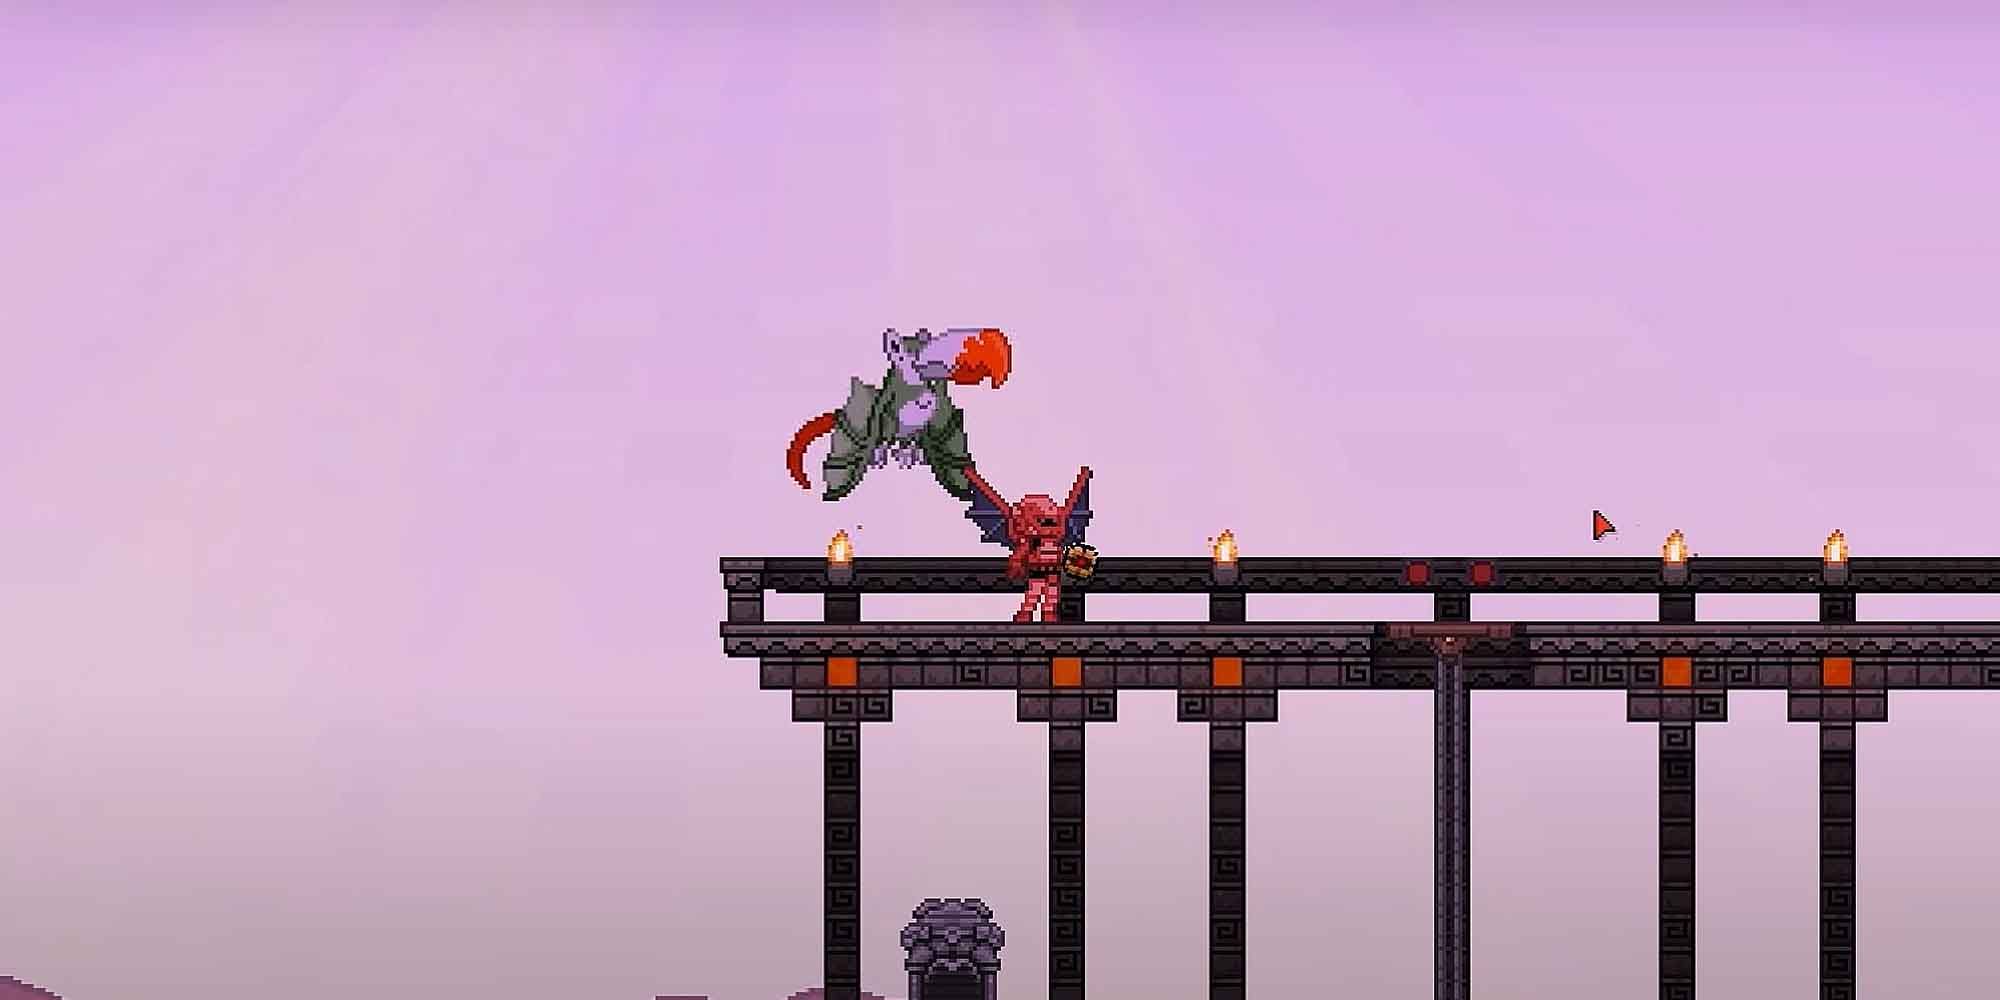 A procedurally generated Large Flying Monster in Starbound